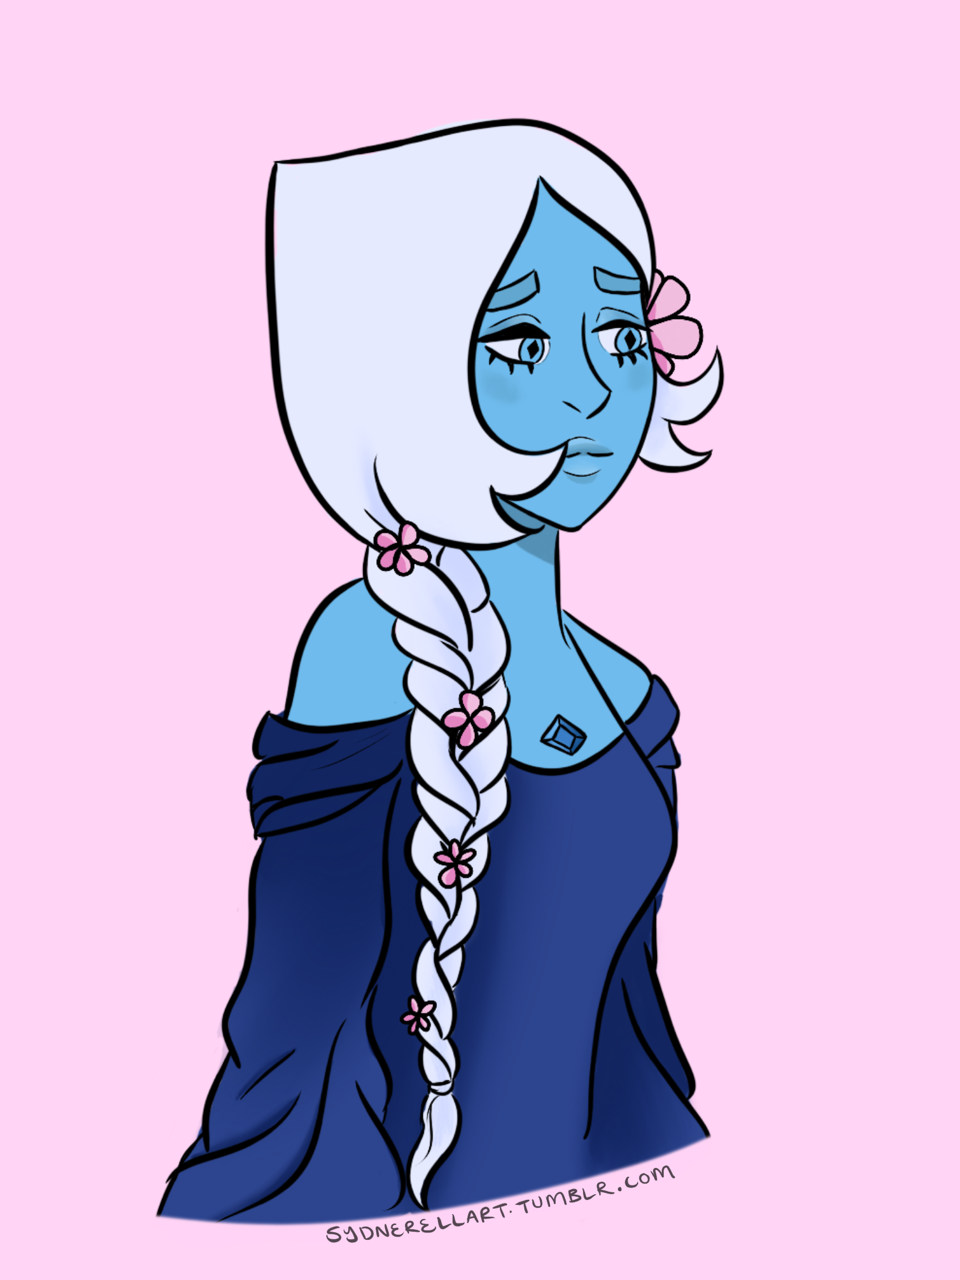 song inspo: “flowers in her hair” by the lumineers lazy late night doodle of blue diamond